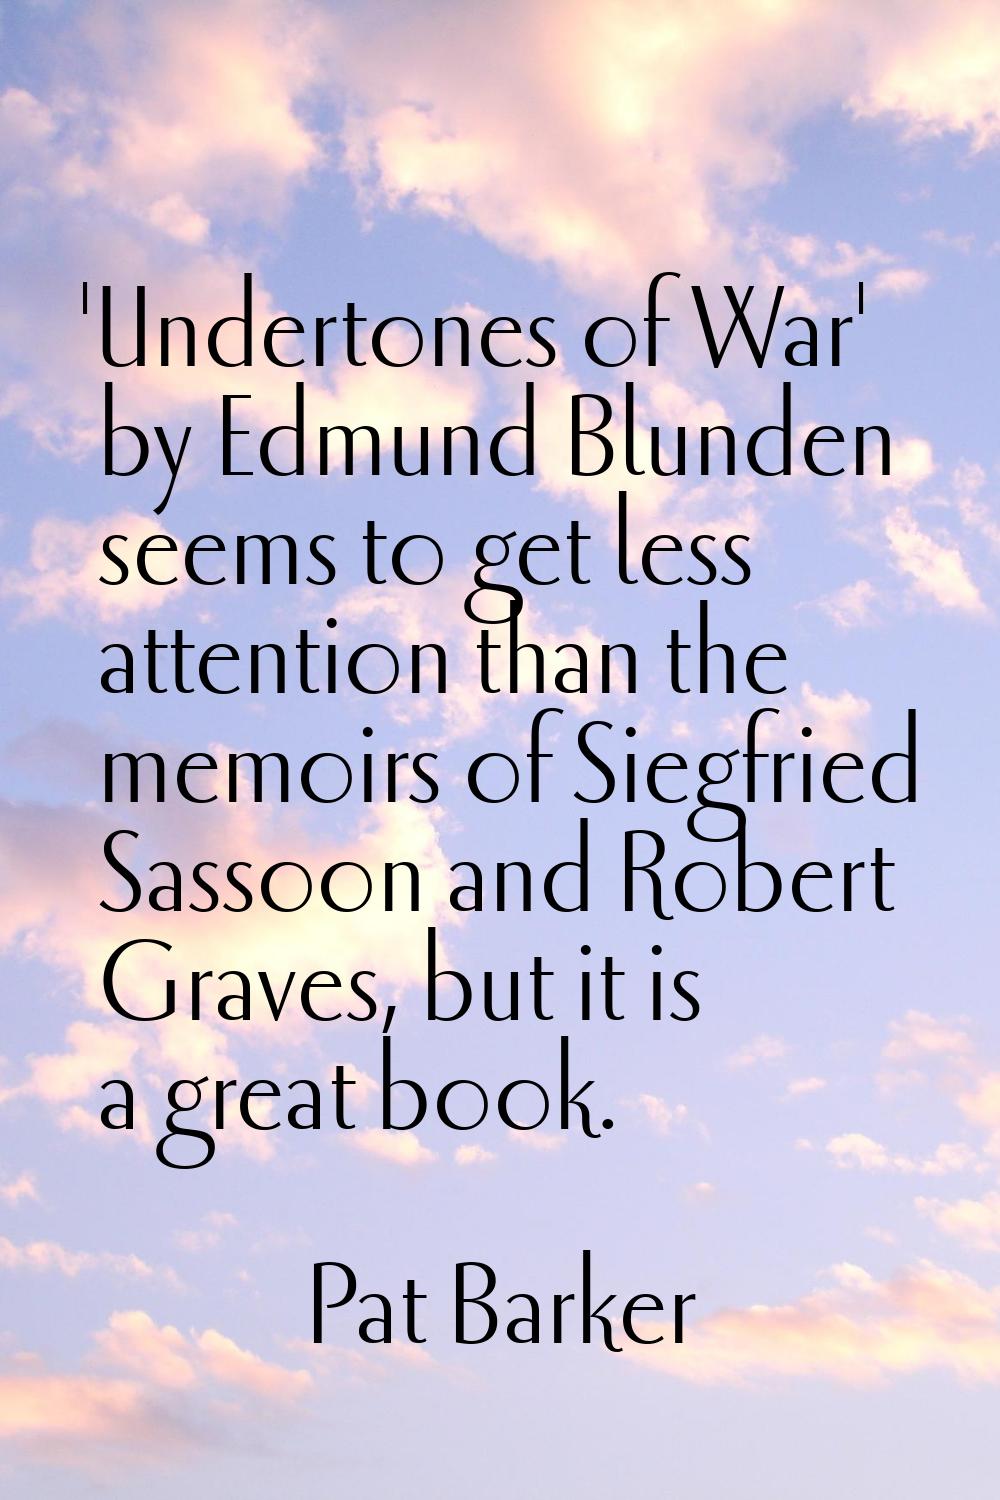 'Undertones of War' by Edmund Blunden seems to get less attention than the memoirs of Siegfried Sas